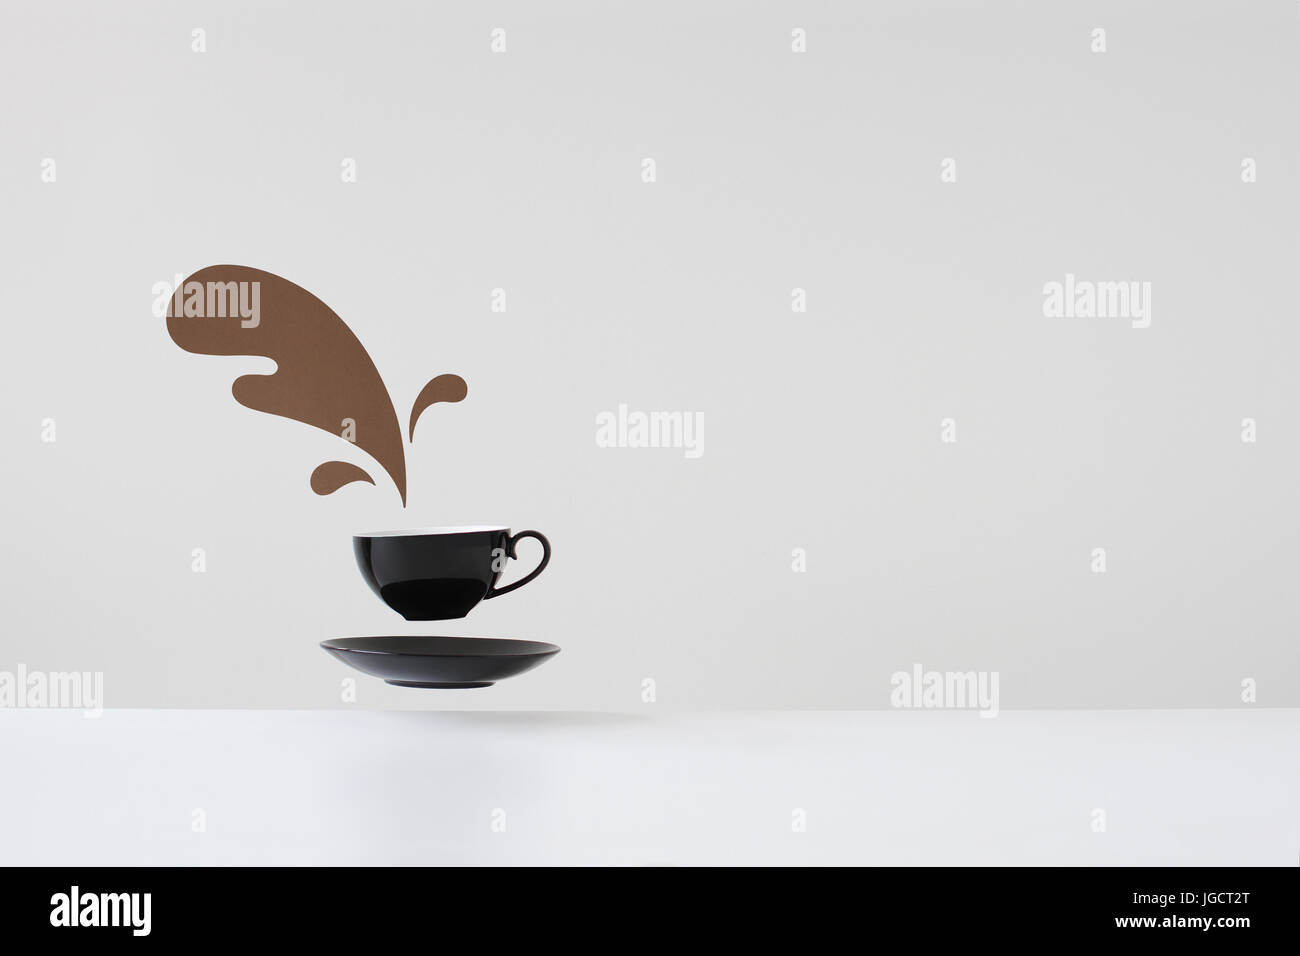 Conceptual spilled coffee from floating cup and saucer Stock Photo